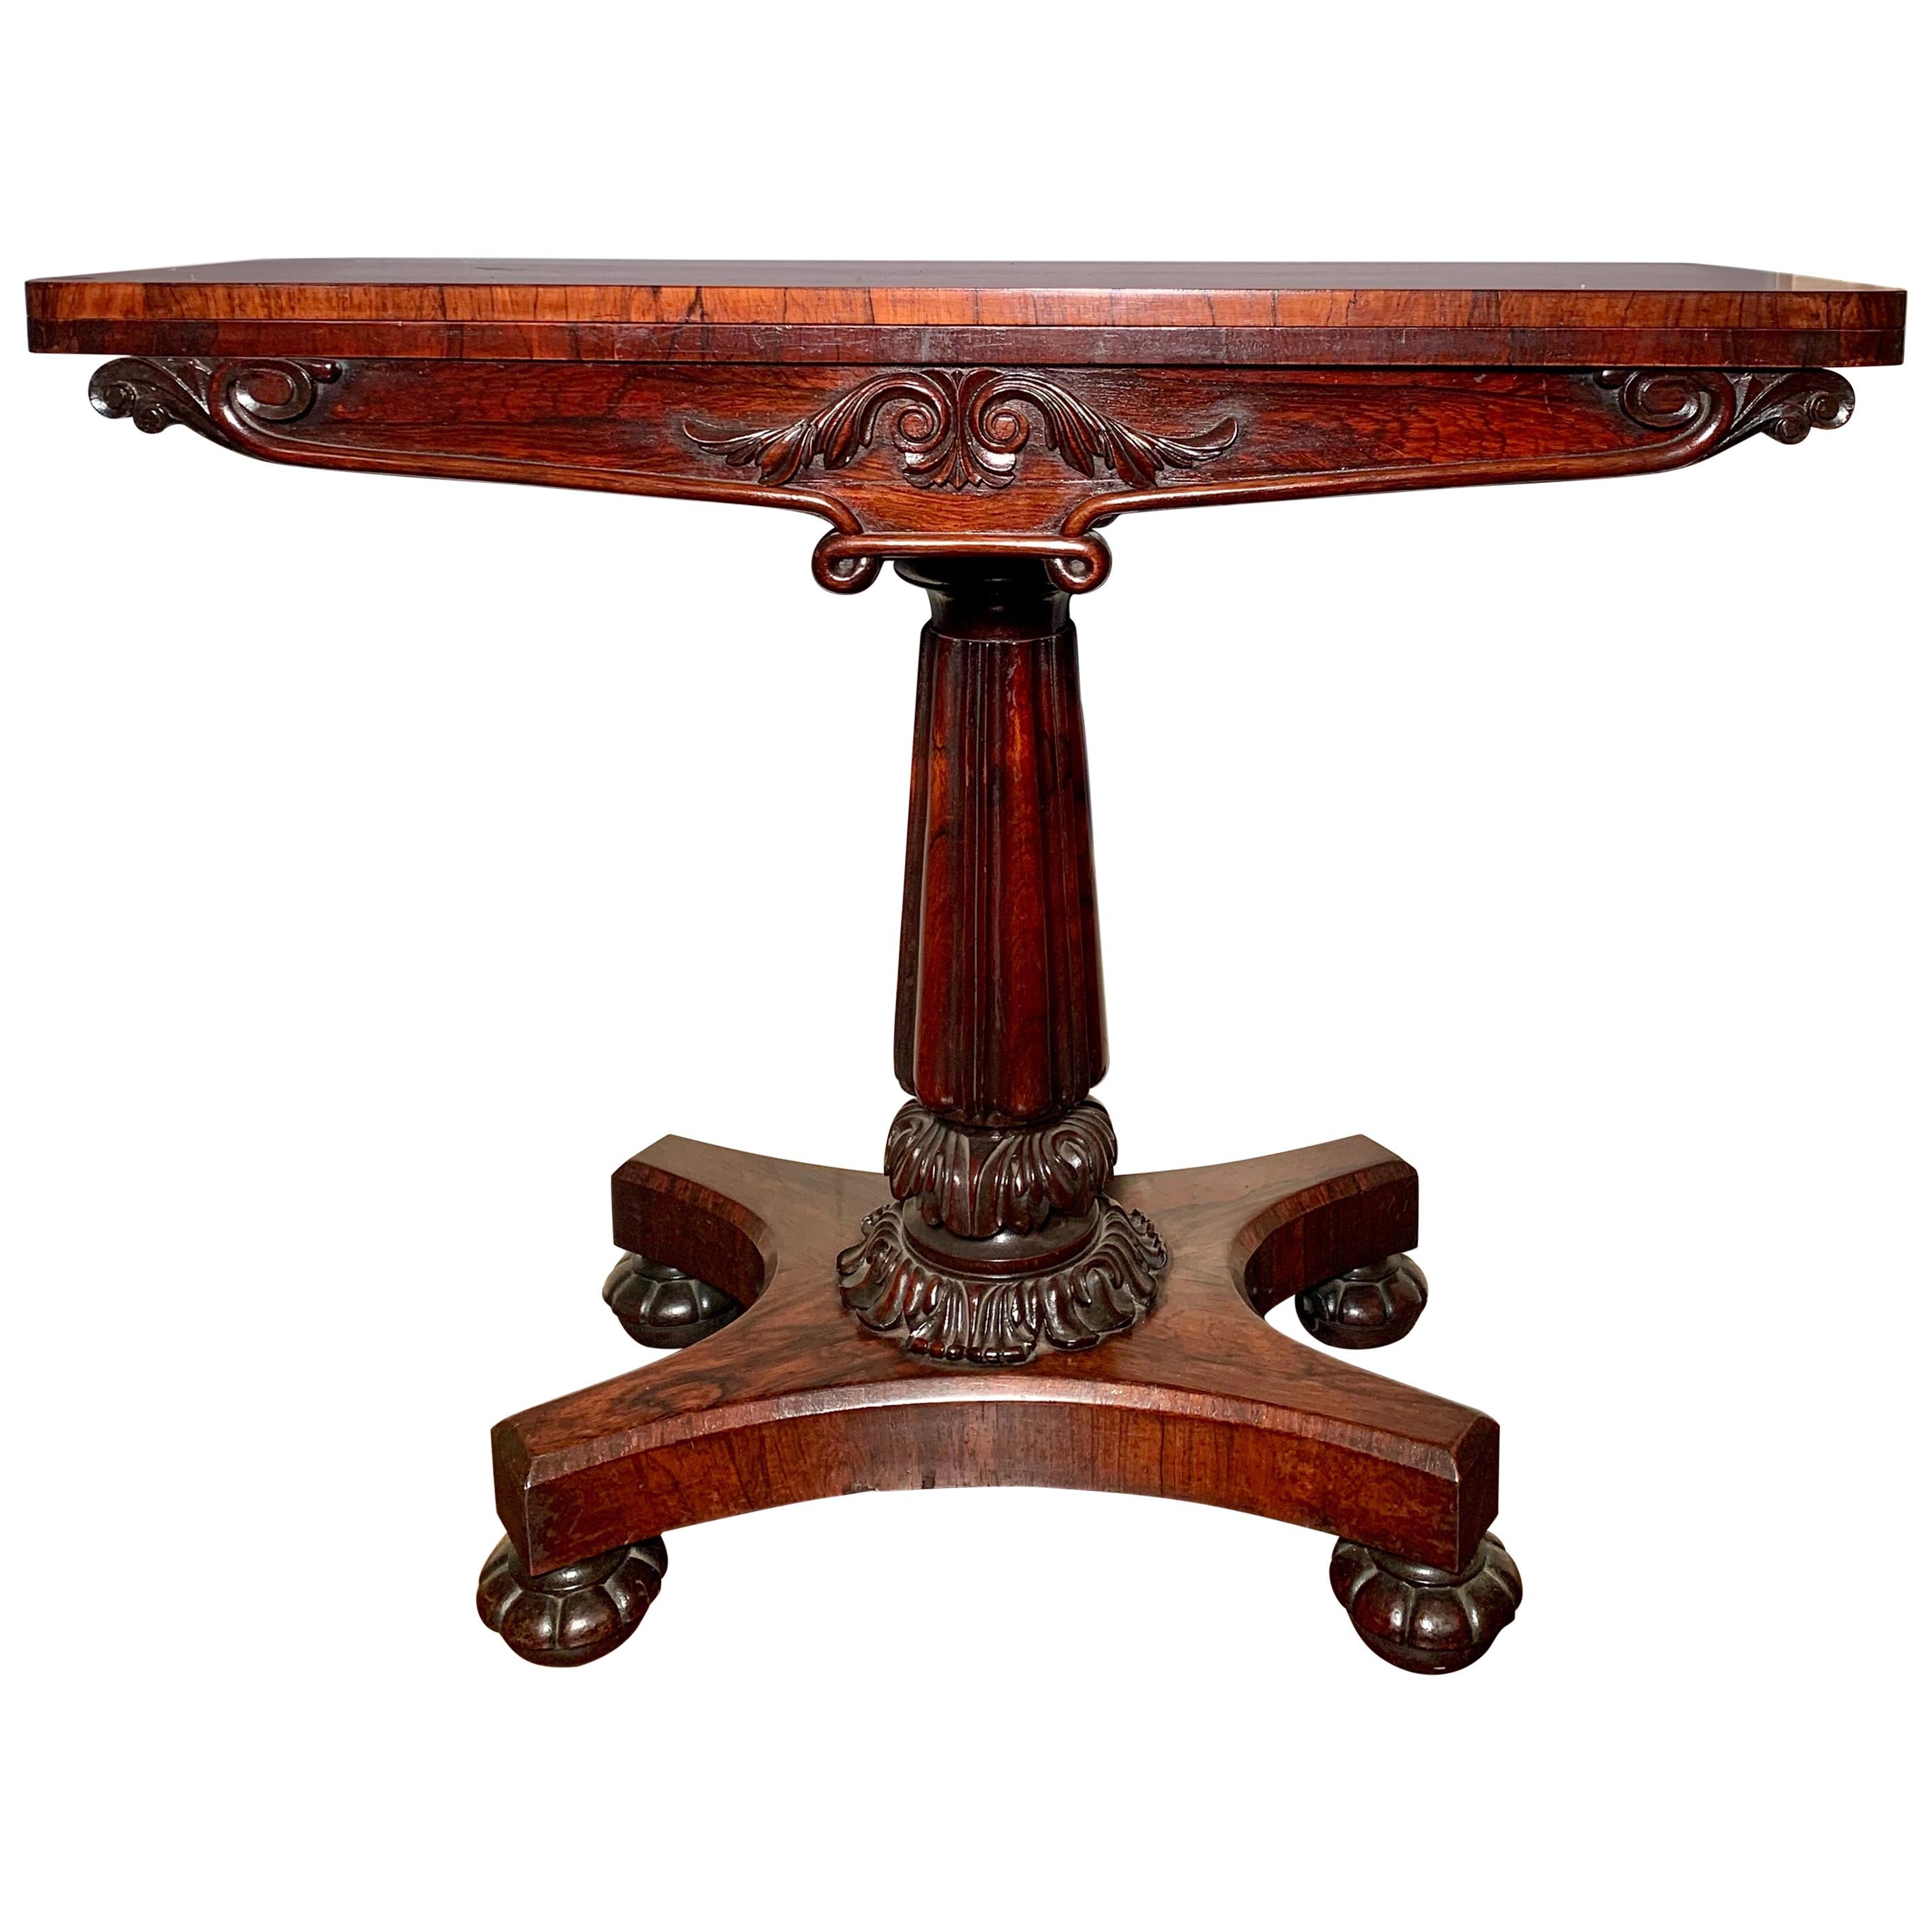 Antique English Regency Period Rosewood Console Table, circa 1810-1830 For Sale